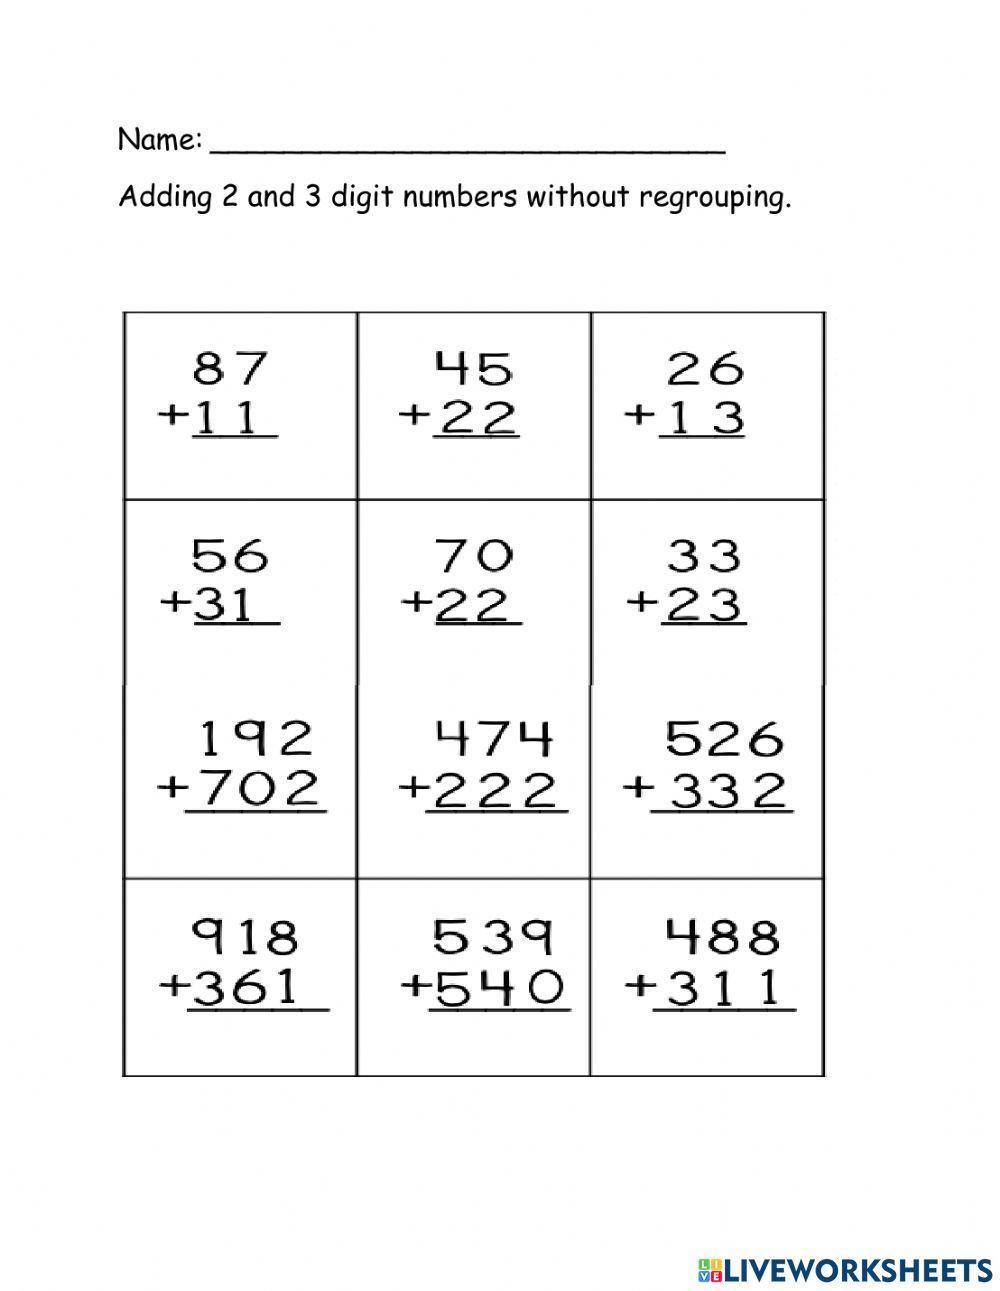 Adding 2 and 3 digit numbers without regrouping